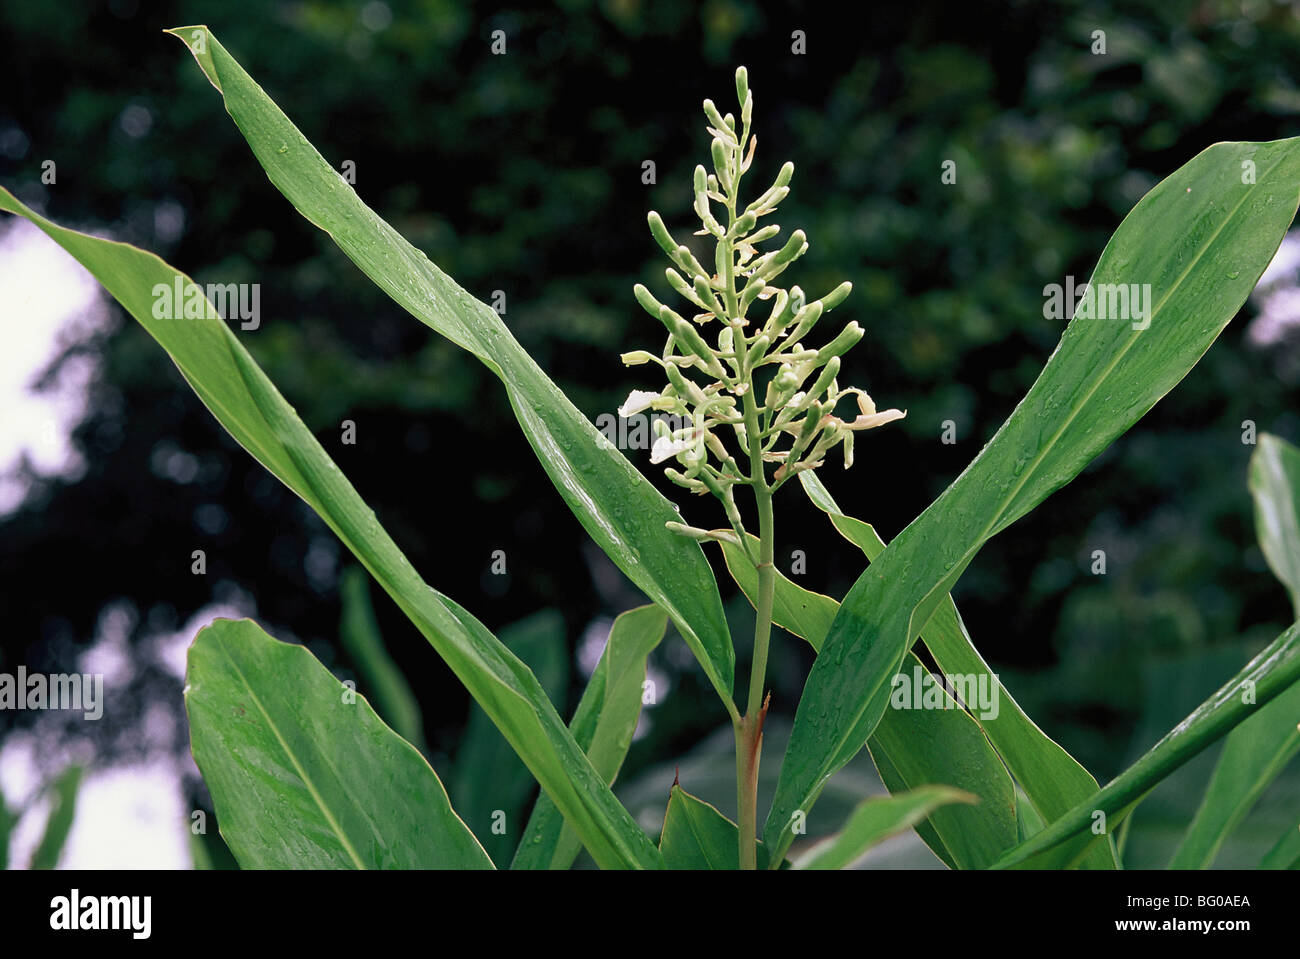 Ginger plant, used in cooking and medicine, for stomach complaints, motion sickness, rheumatism, and poor blood circulation Stock Photo